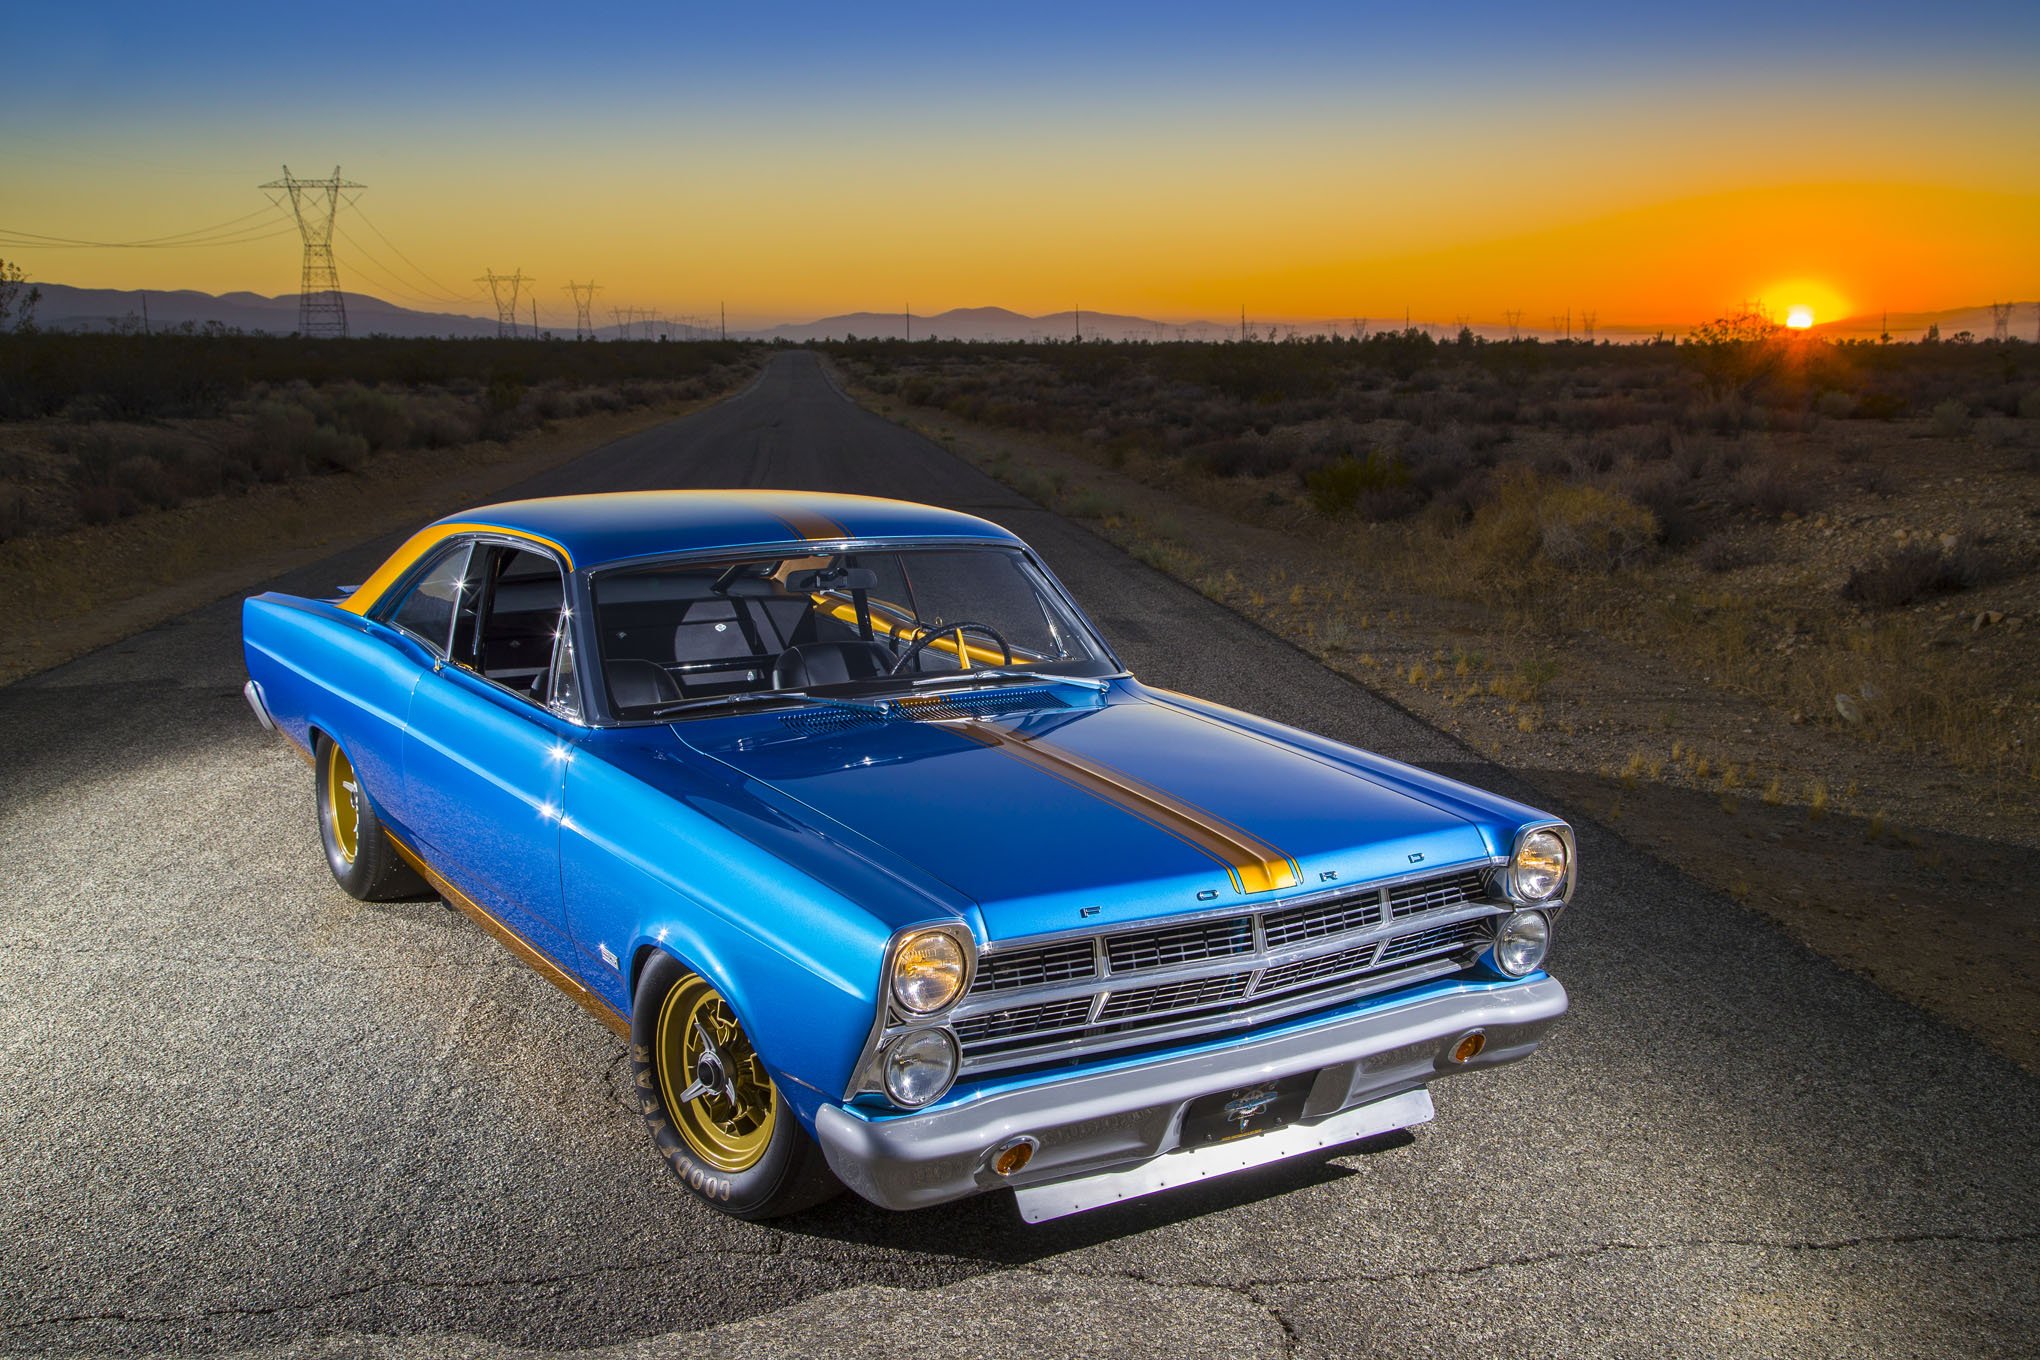 Ford Fairlane 500 Wallpapers